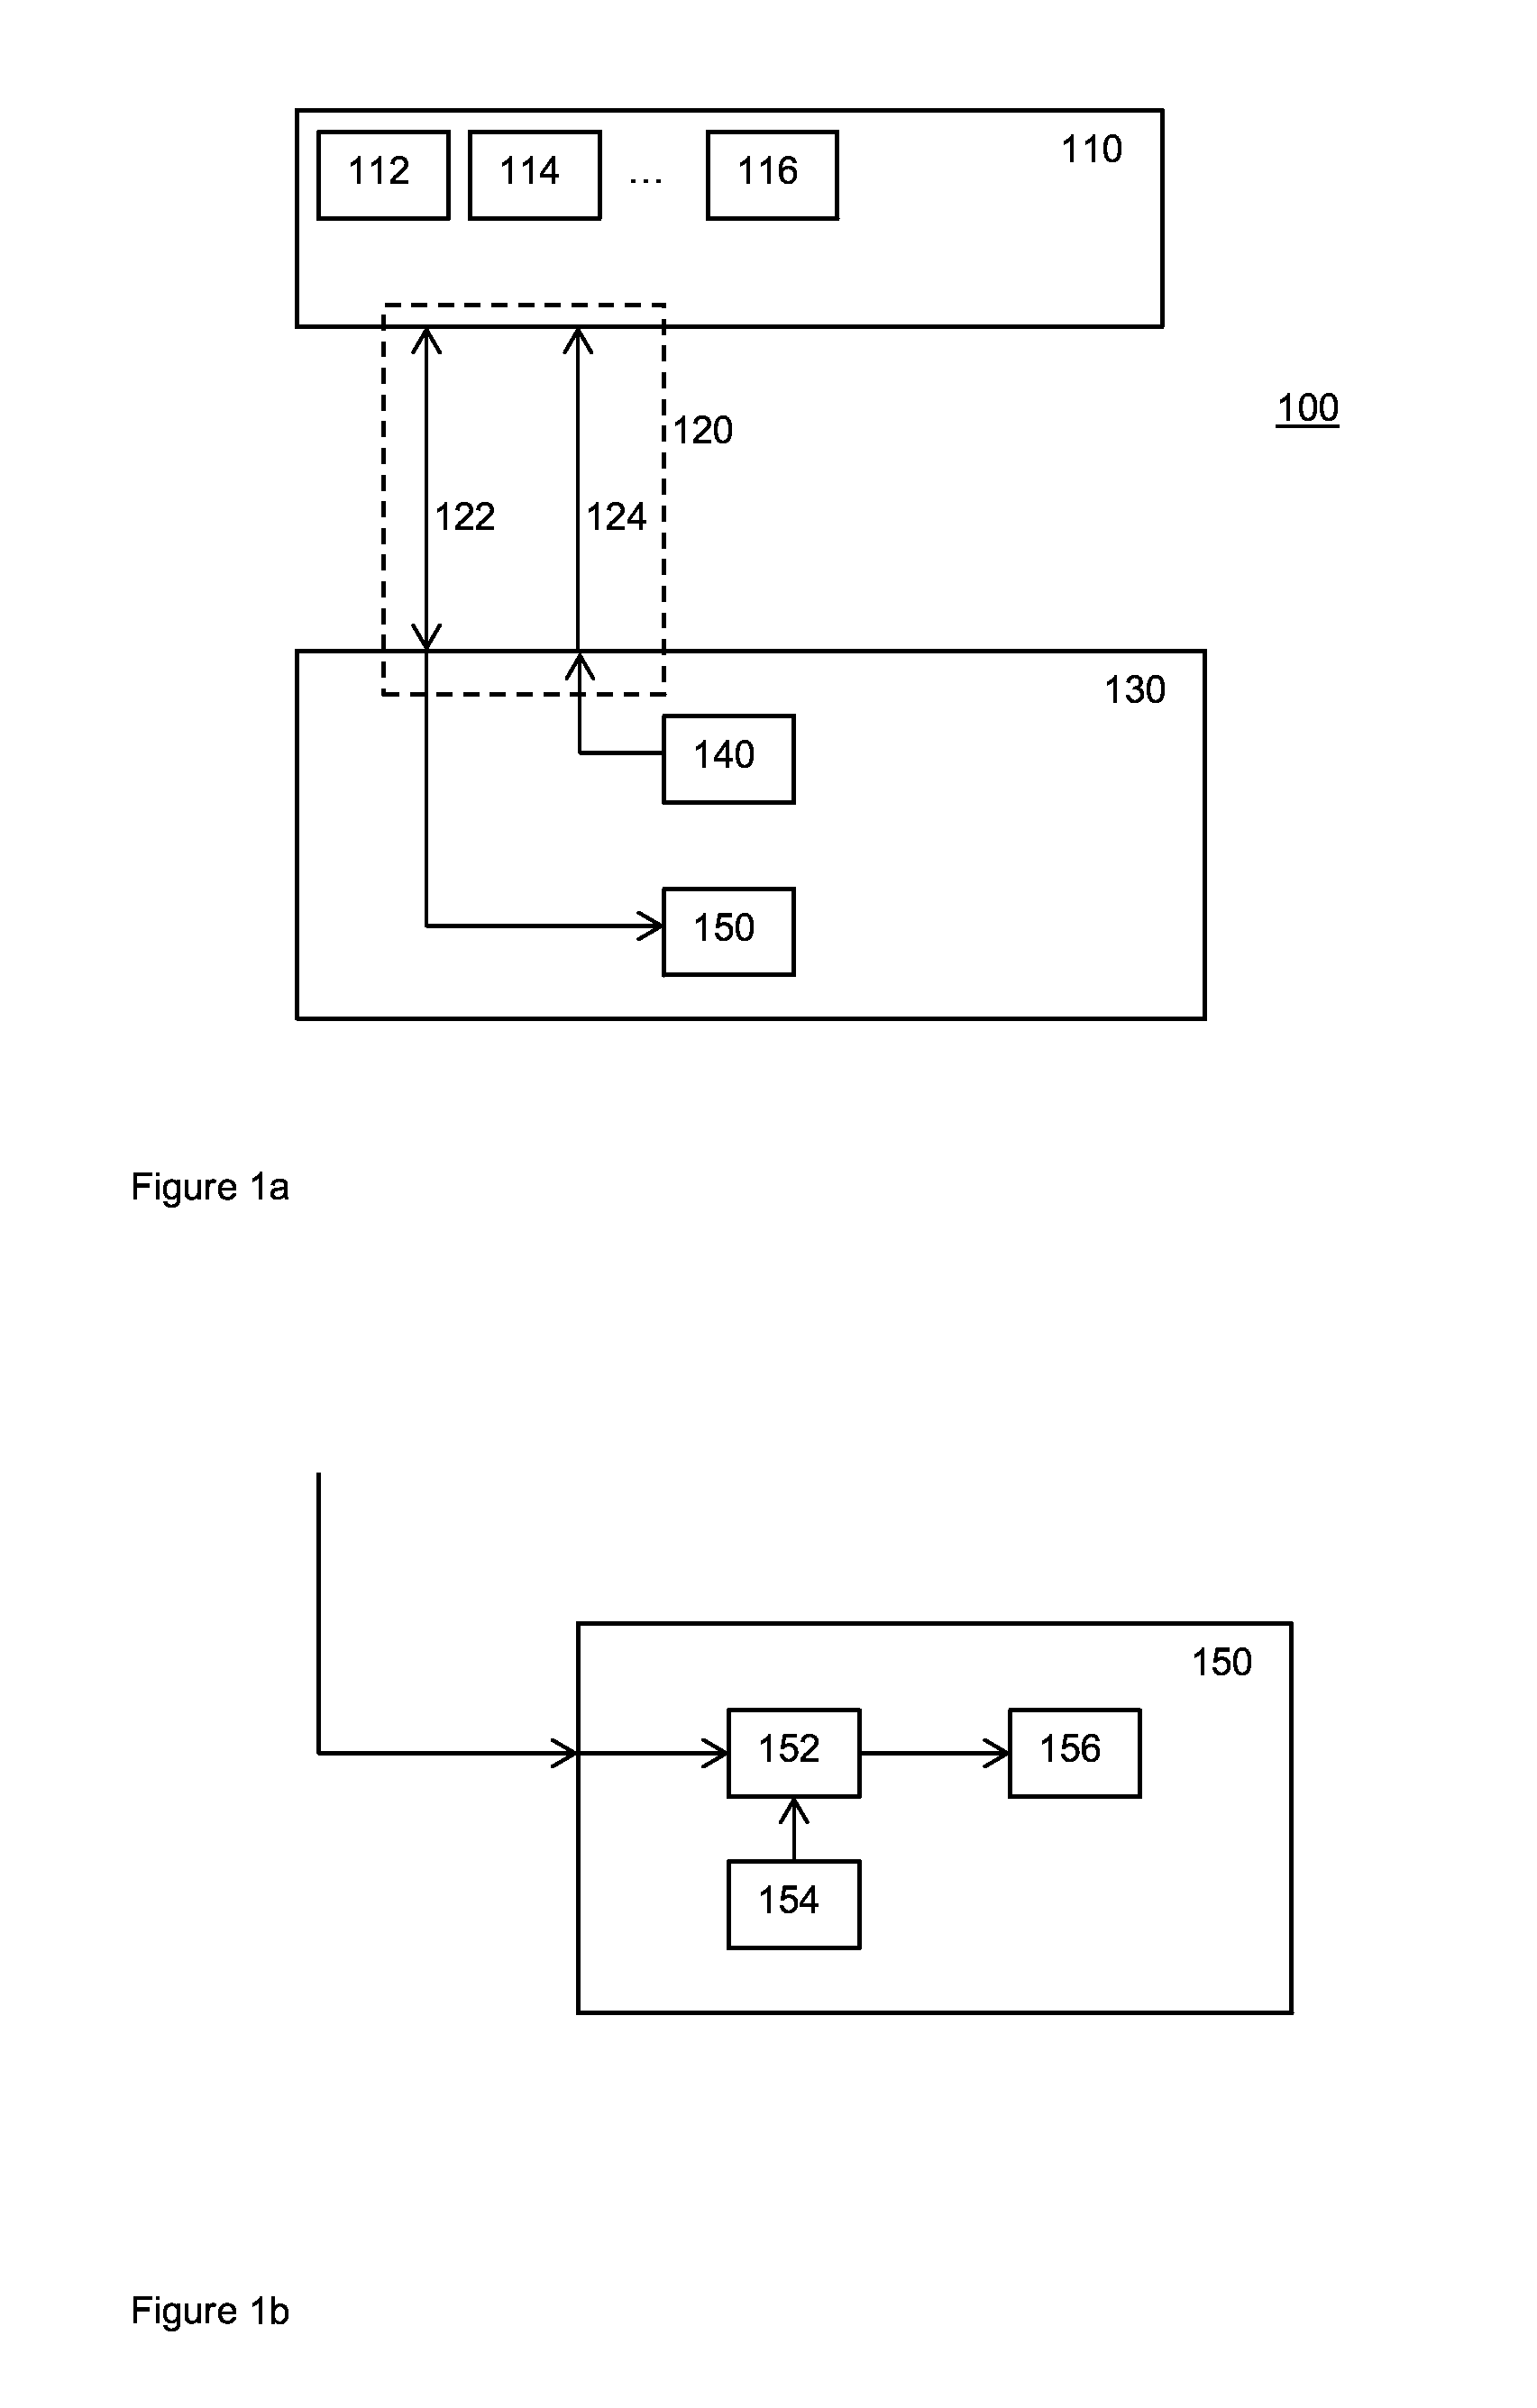 System for generating a cryptographic key from a memory used as a physically unclonable function